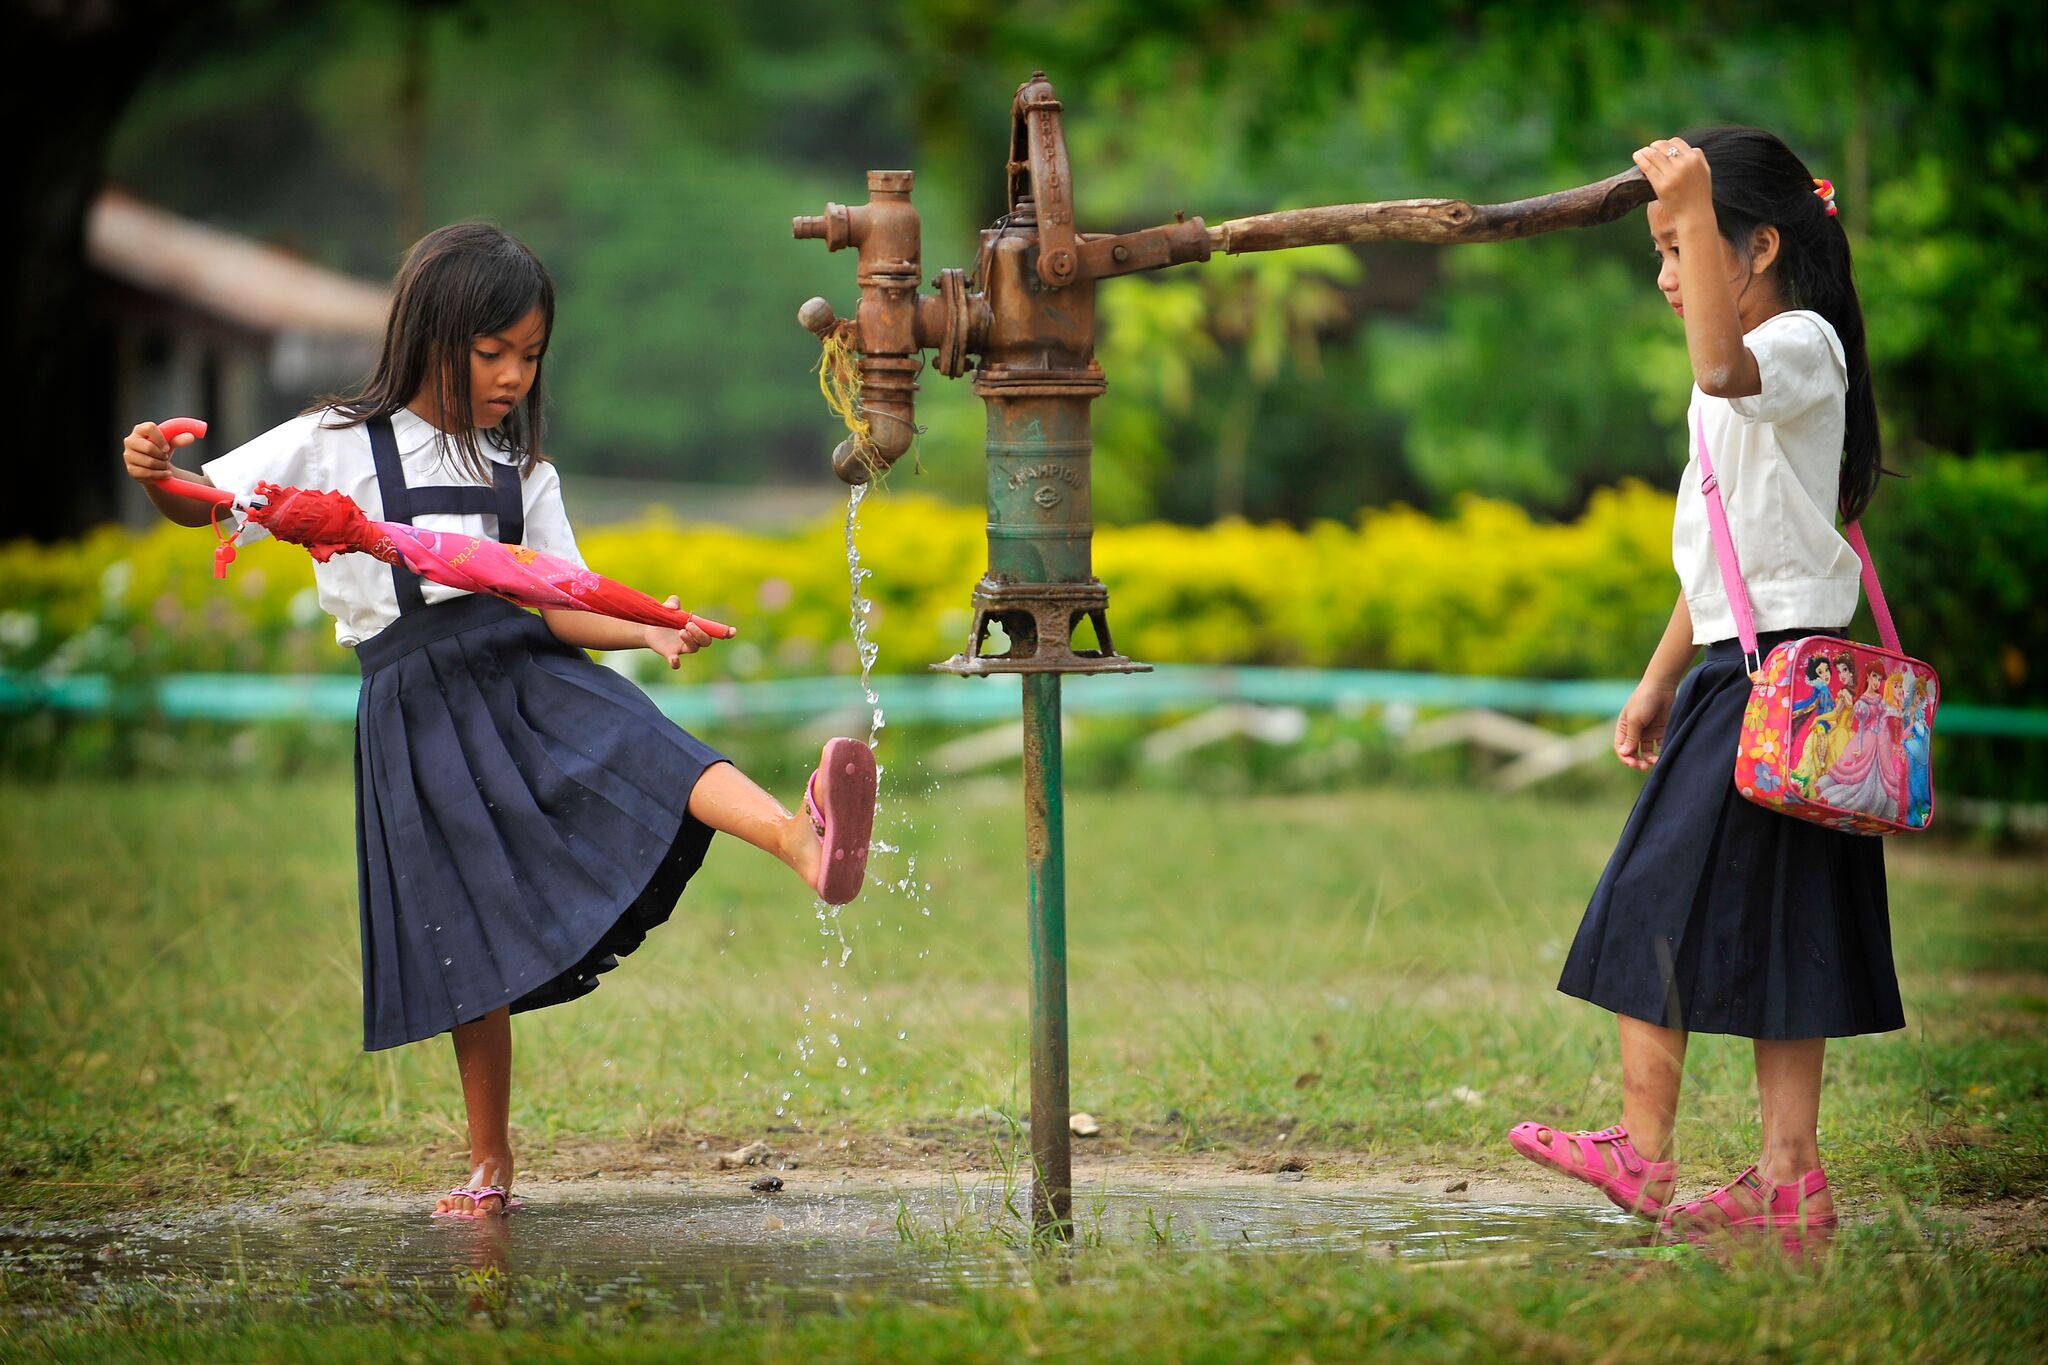 Children are particularly affected by diseases caused by unclean water, and the effort required to collect safe water keeps many children -- mainly girls -- out of school